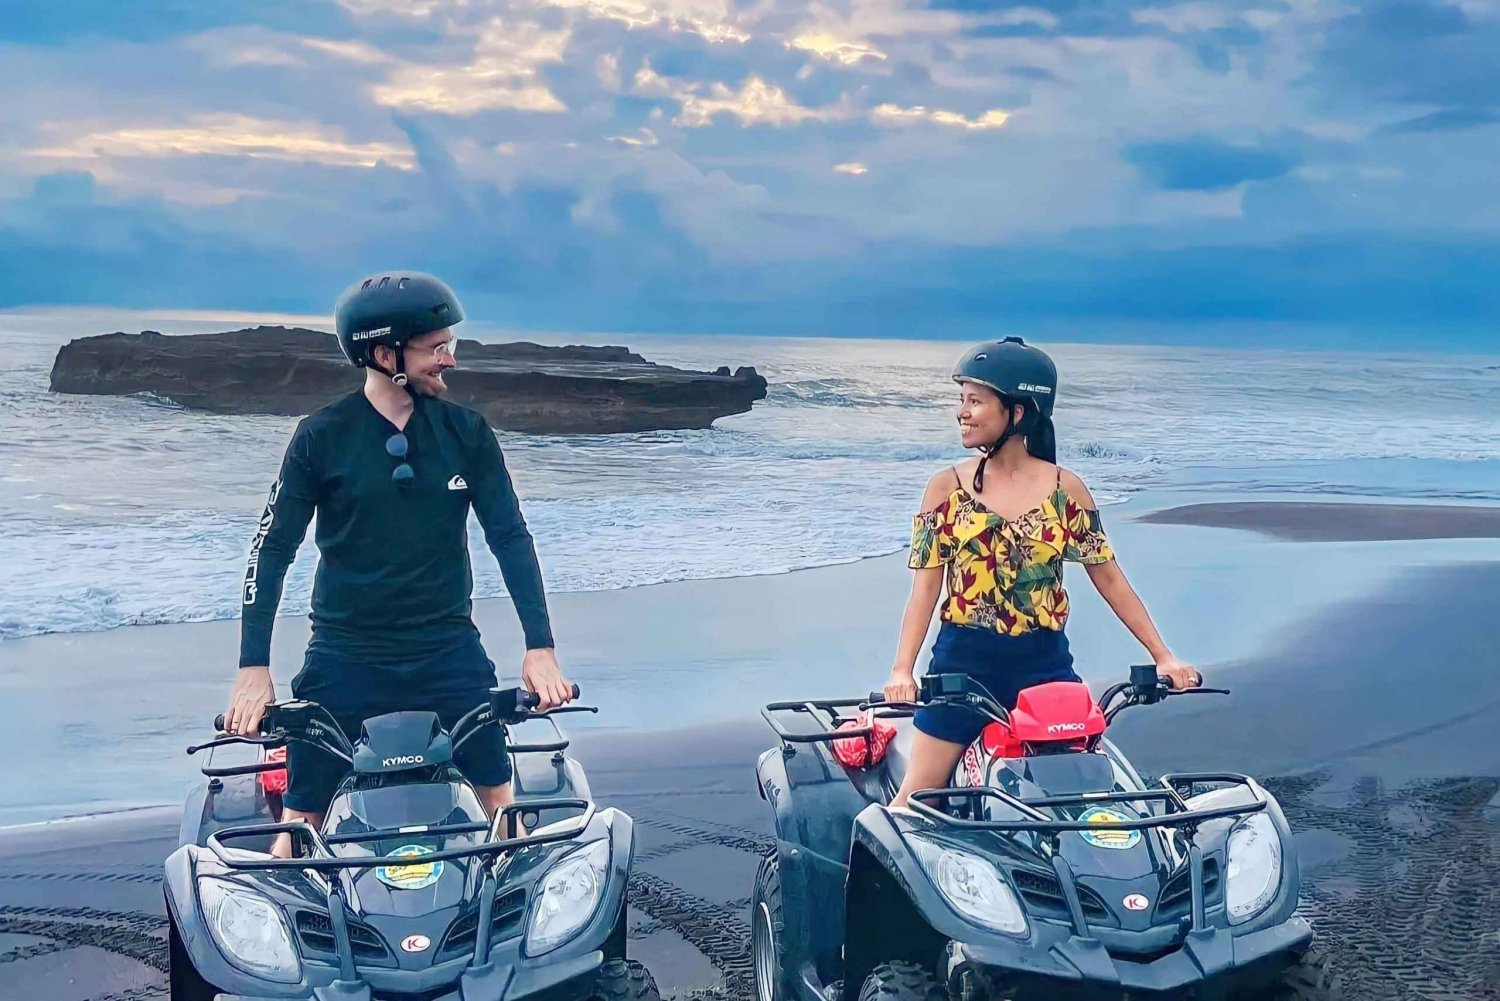 Bali: Quad Bike Beach Ride Experience with Lunch